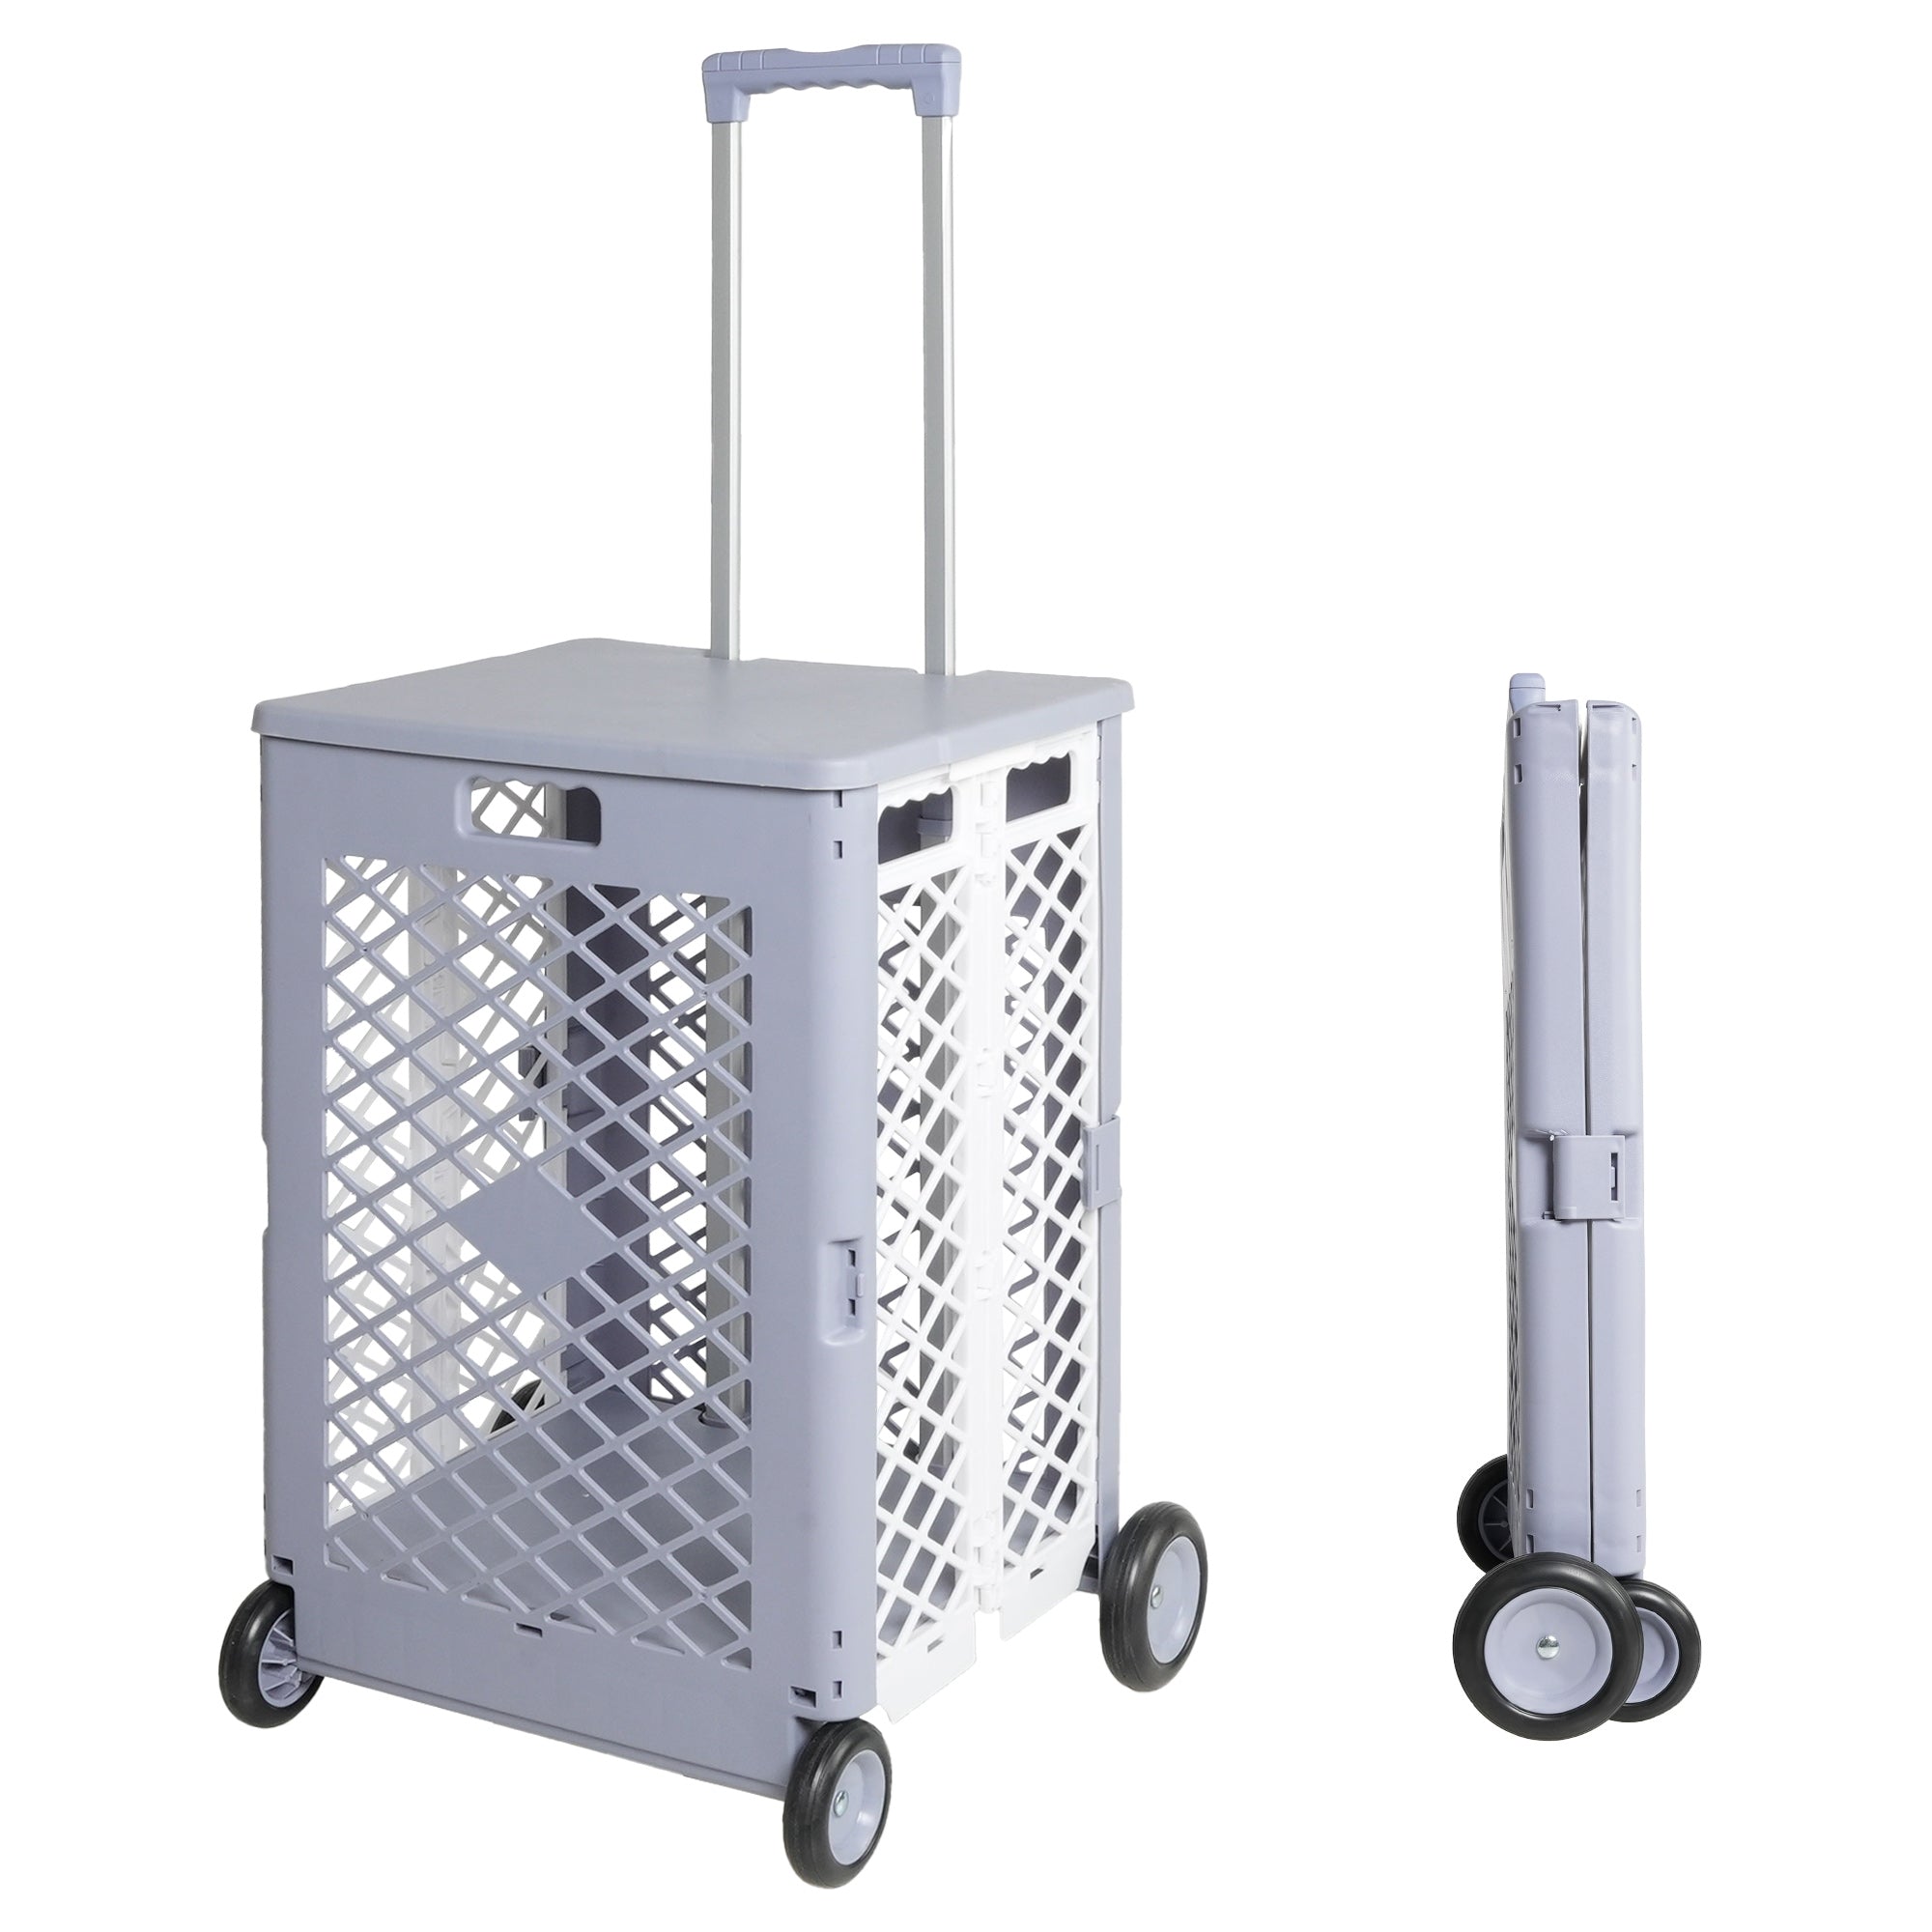 55L Foldable Mesh Rolling Cart with Wheels Utility Tools Rolling Crate w/ Telescopic Handle, Gray